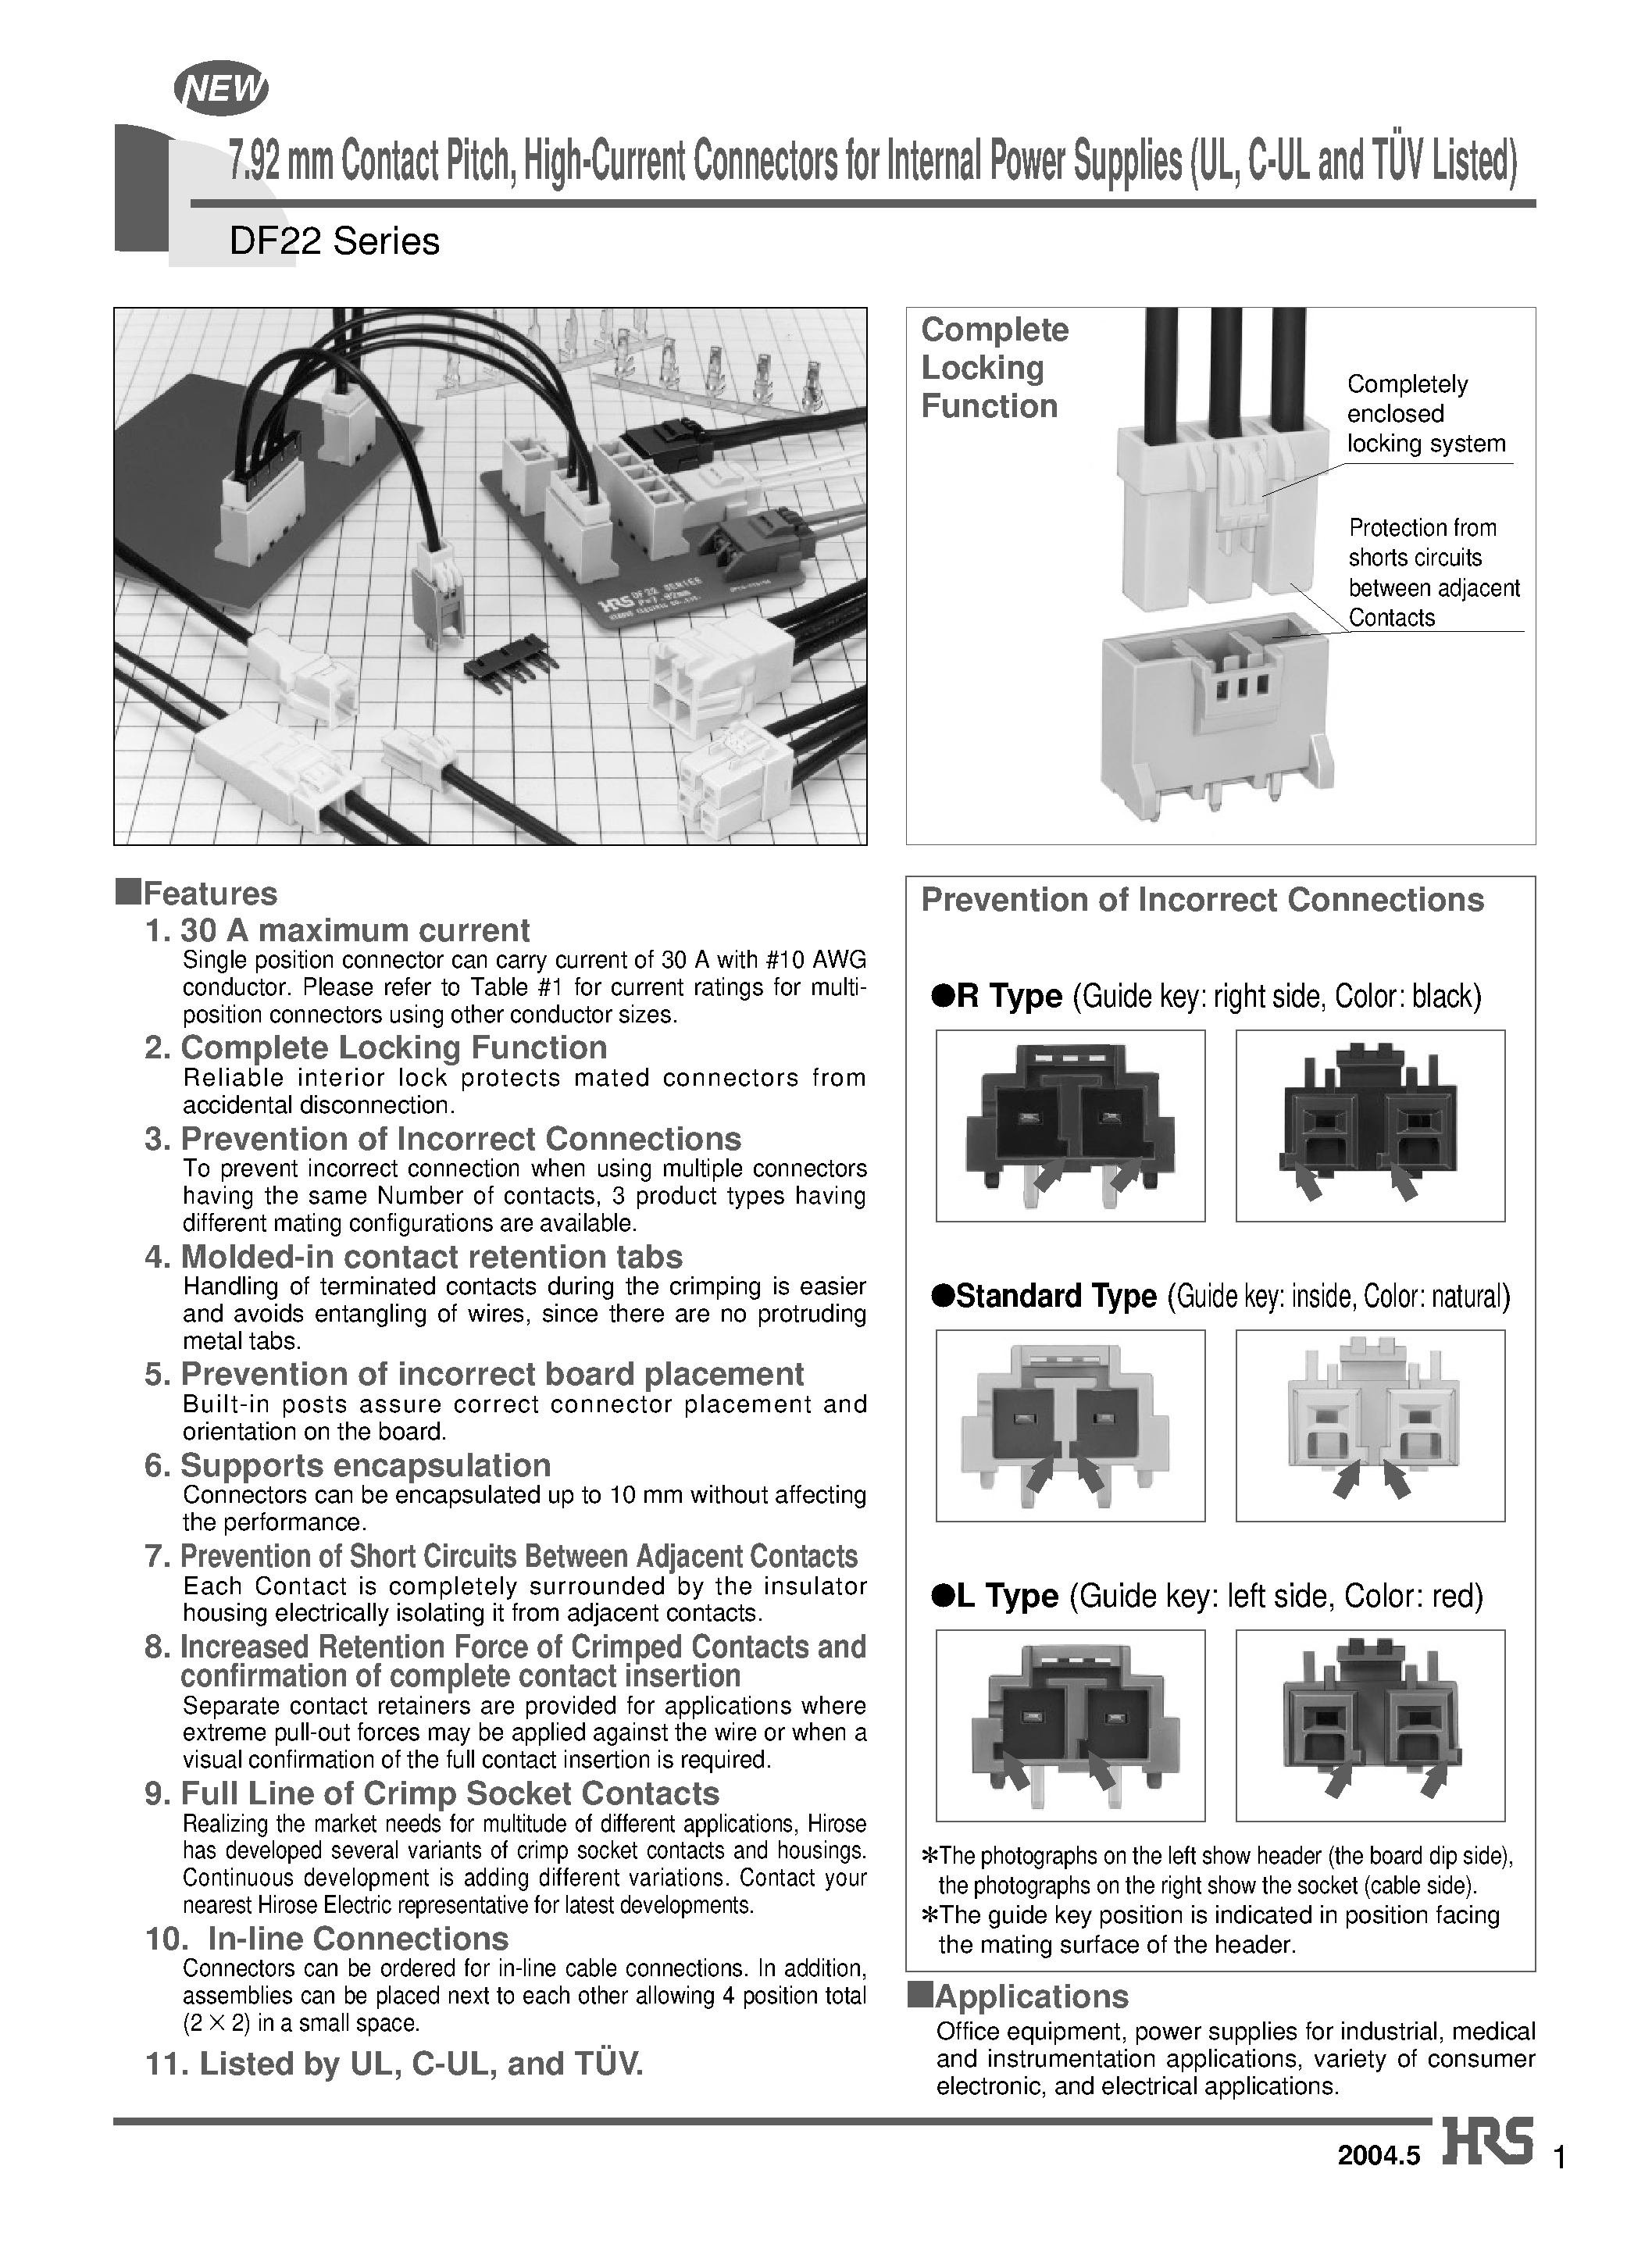 Datasheet DF22A-2DEP-7.92DSA - 7.92 mm Contact Pitch/ High-Current Connectors for Internal Power Supplies (UL/ C-UL and TUV Listed) page 1